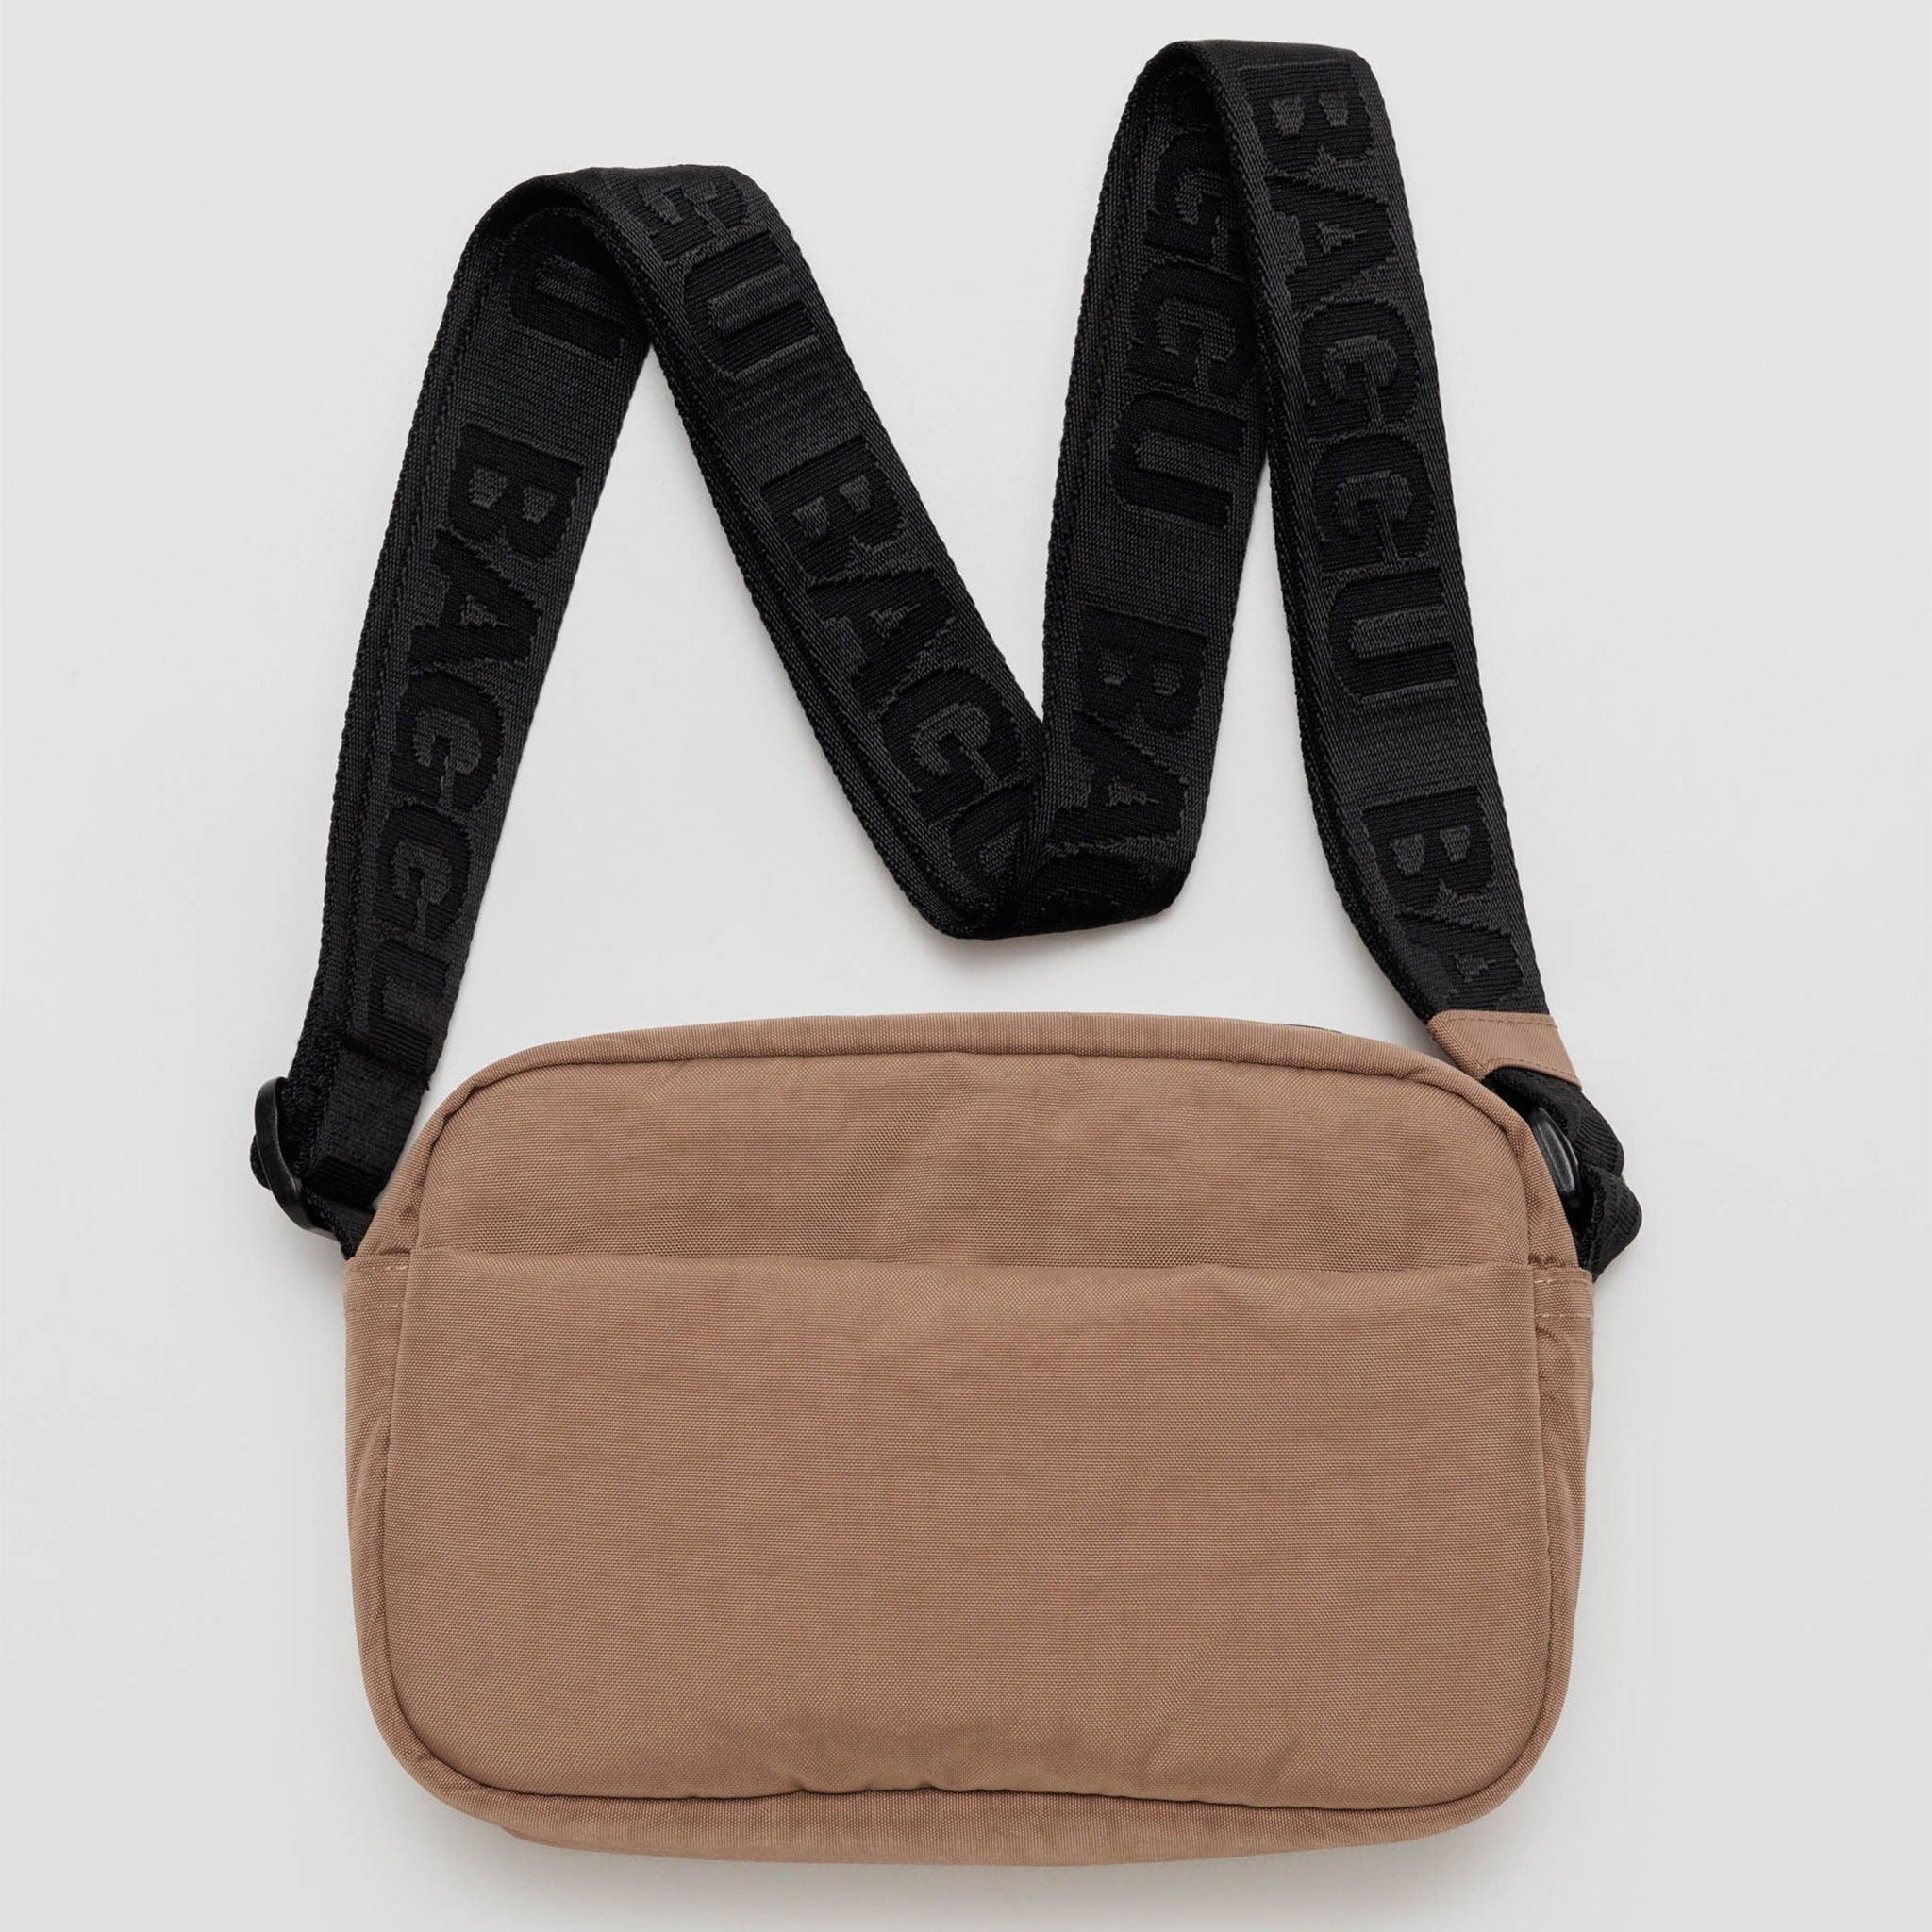 a light brown rectangle shaped bag with front slip pocket and black strap